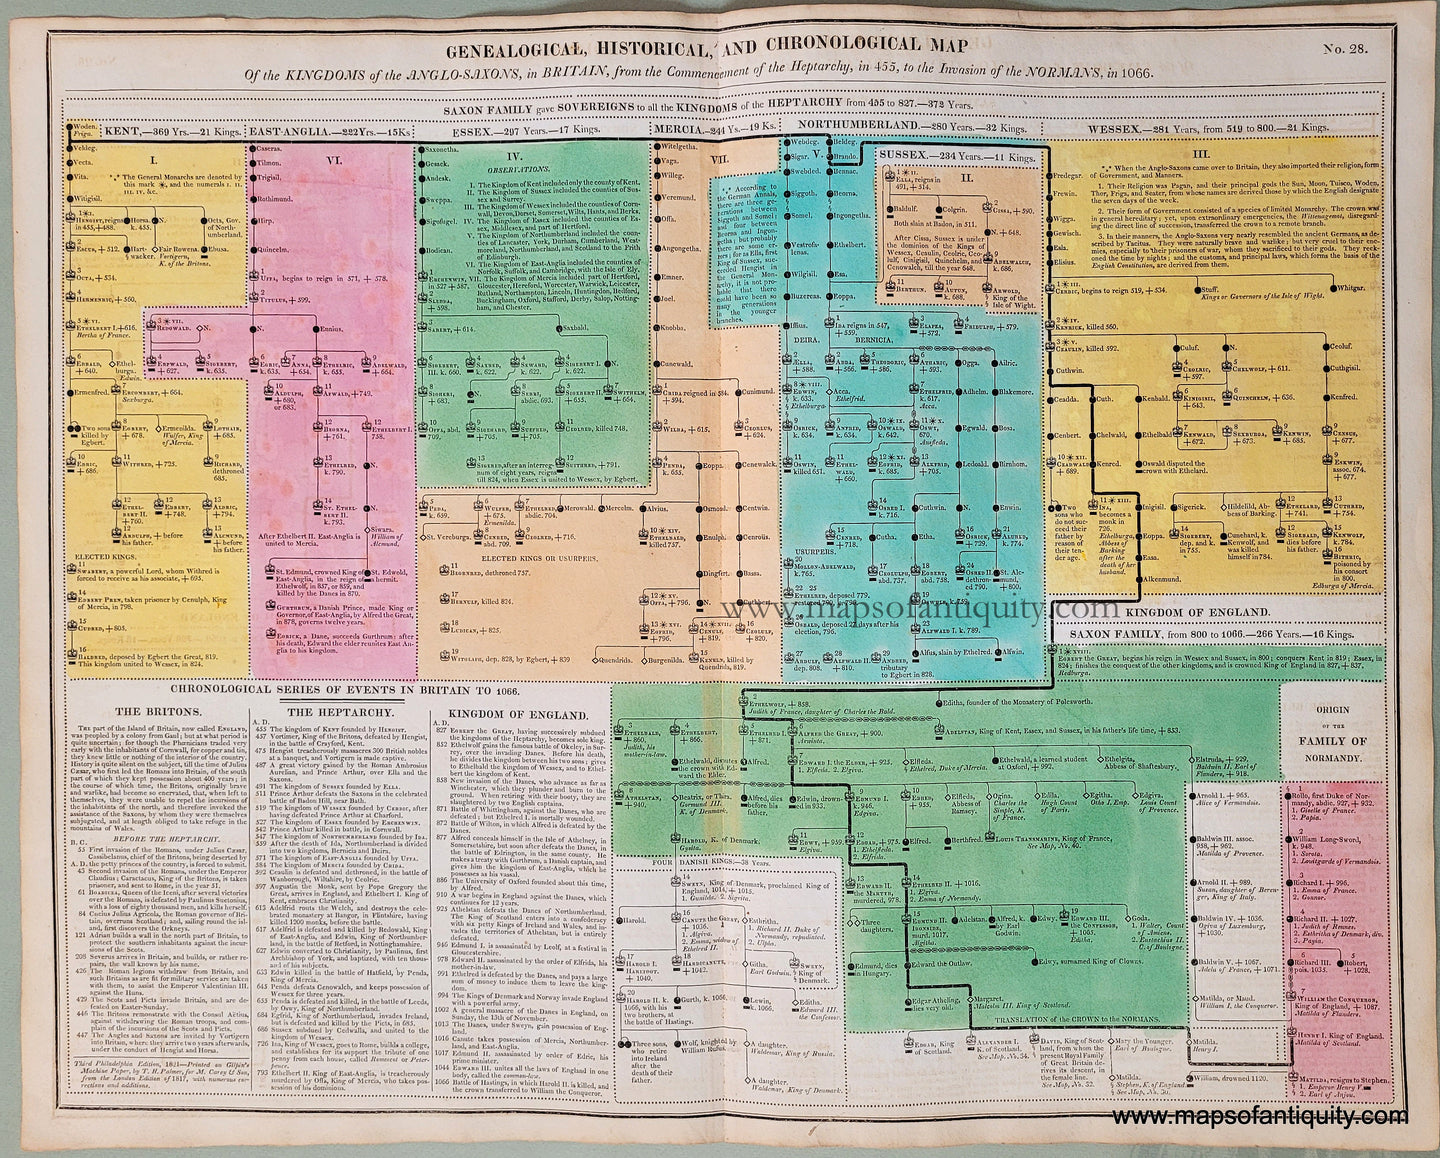 1821 - Genealogical, Historical, and Chronological Map of the Kingdoms of the Anglo-Saxons, in Britain, from the Commencement of the Heptarchy, in 455, to the Invasion of the Normans, in 1066. No. 28. - Antique Timeline Chart